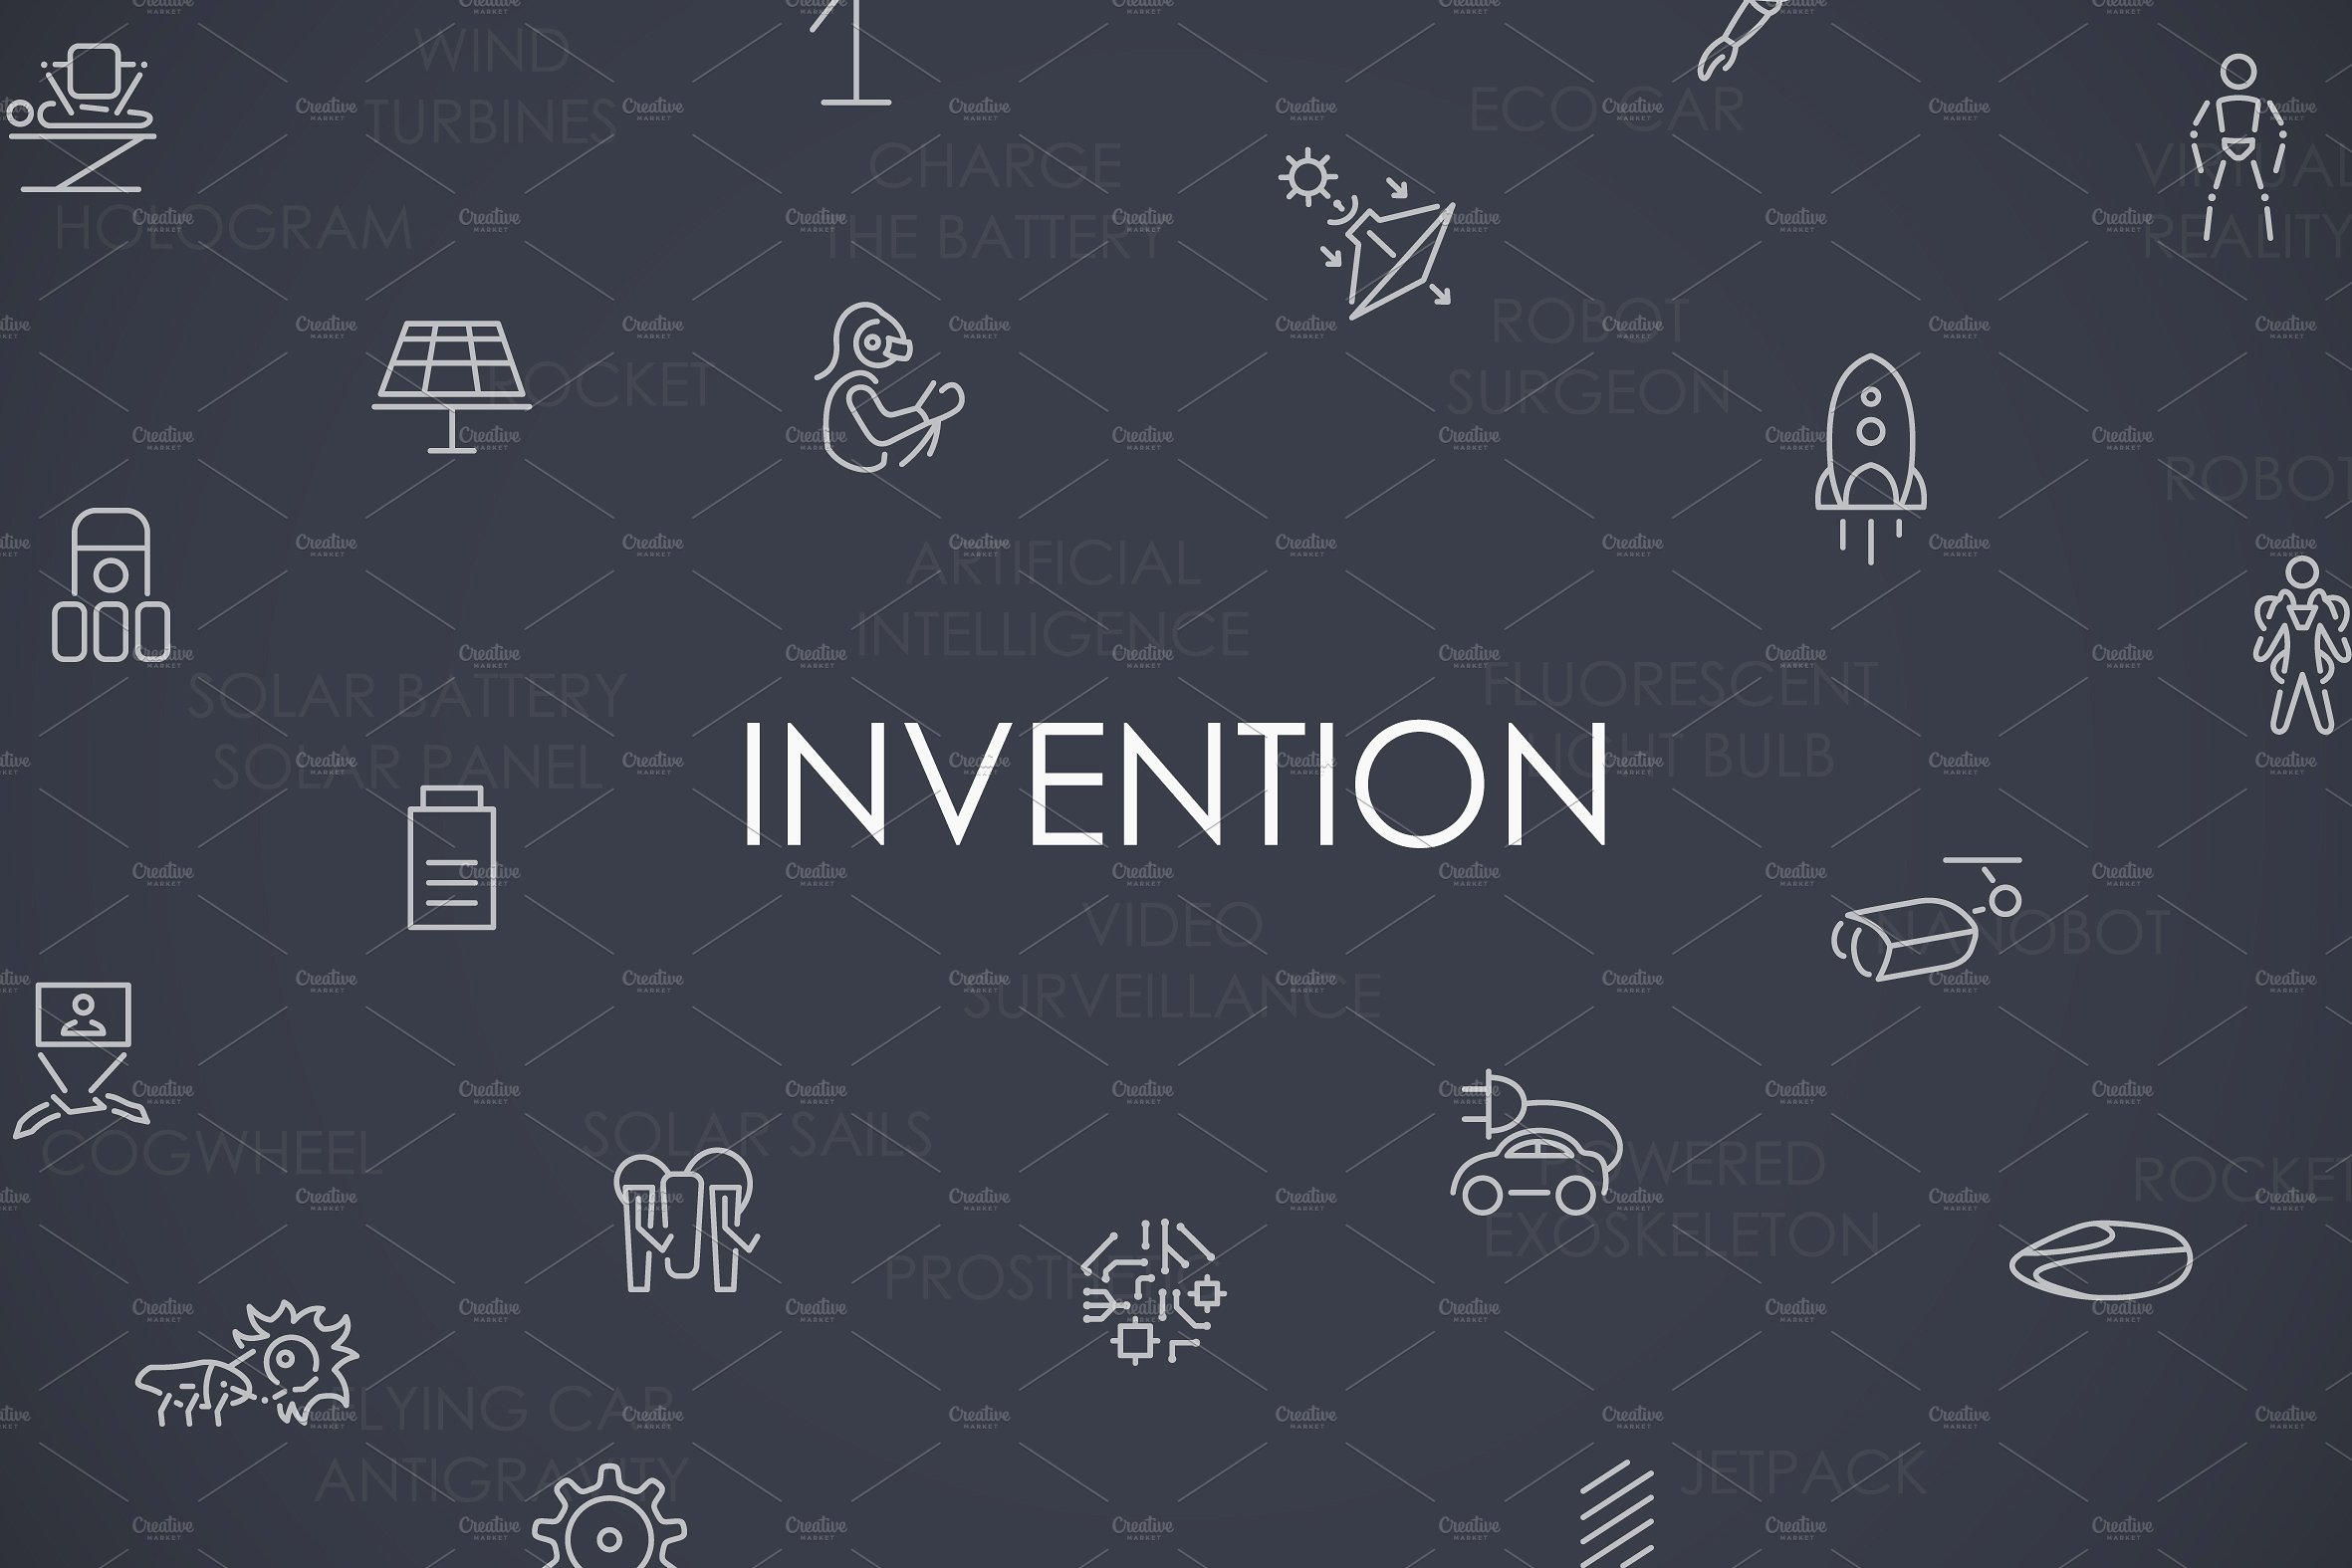 Invention thinline icons